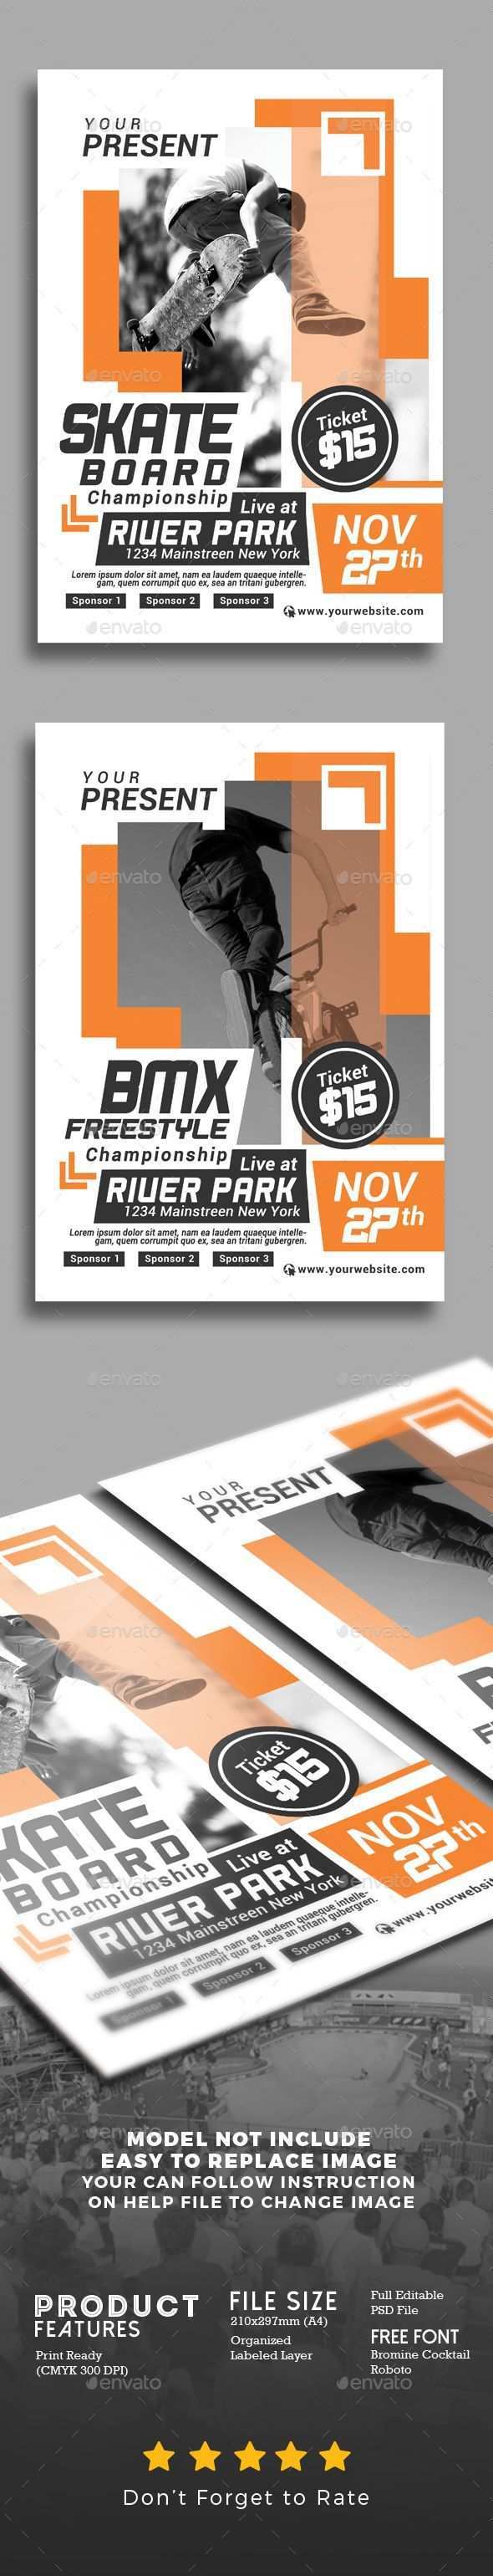 Extreme Sport Competition Flyer Photoshop Psd Action Sport Extreme Sports Download Https Graphicriver Net Item Extreme Flyer Vorlage Flyer Vorlagen